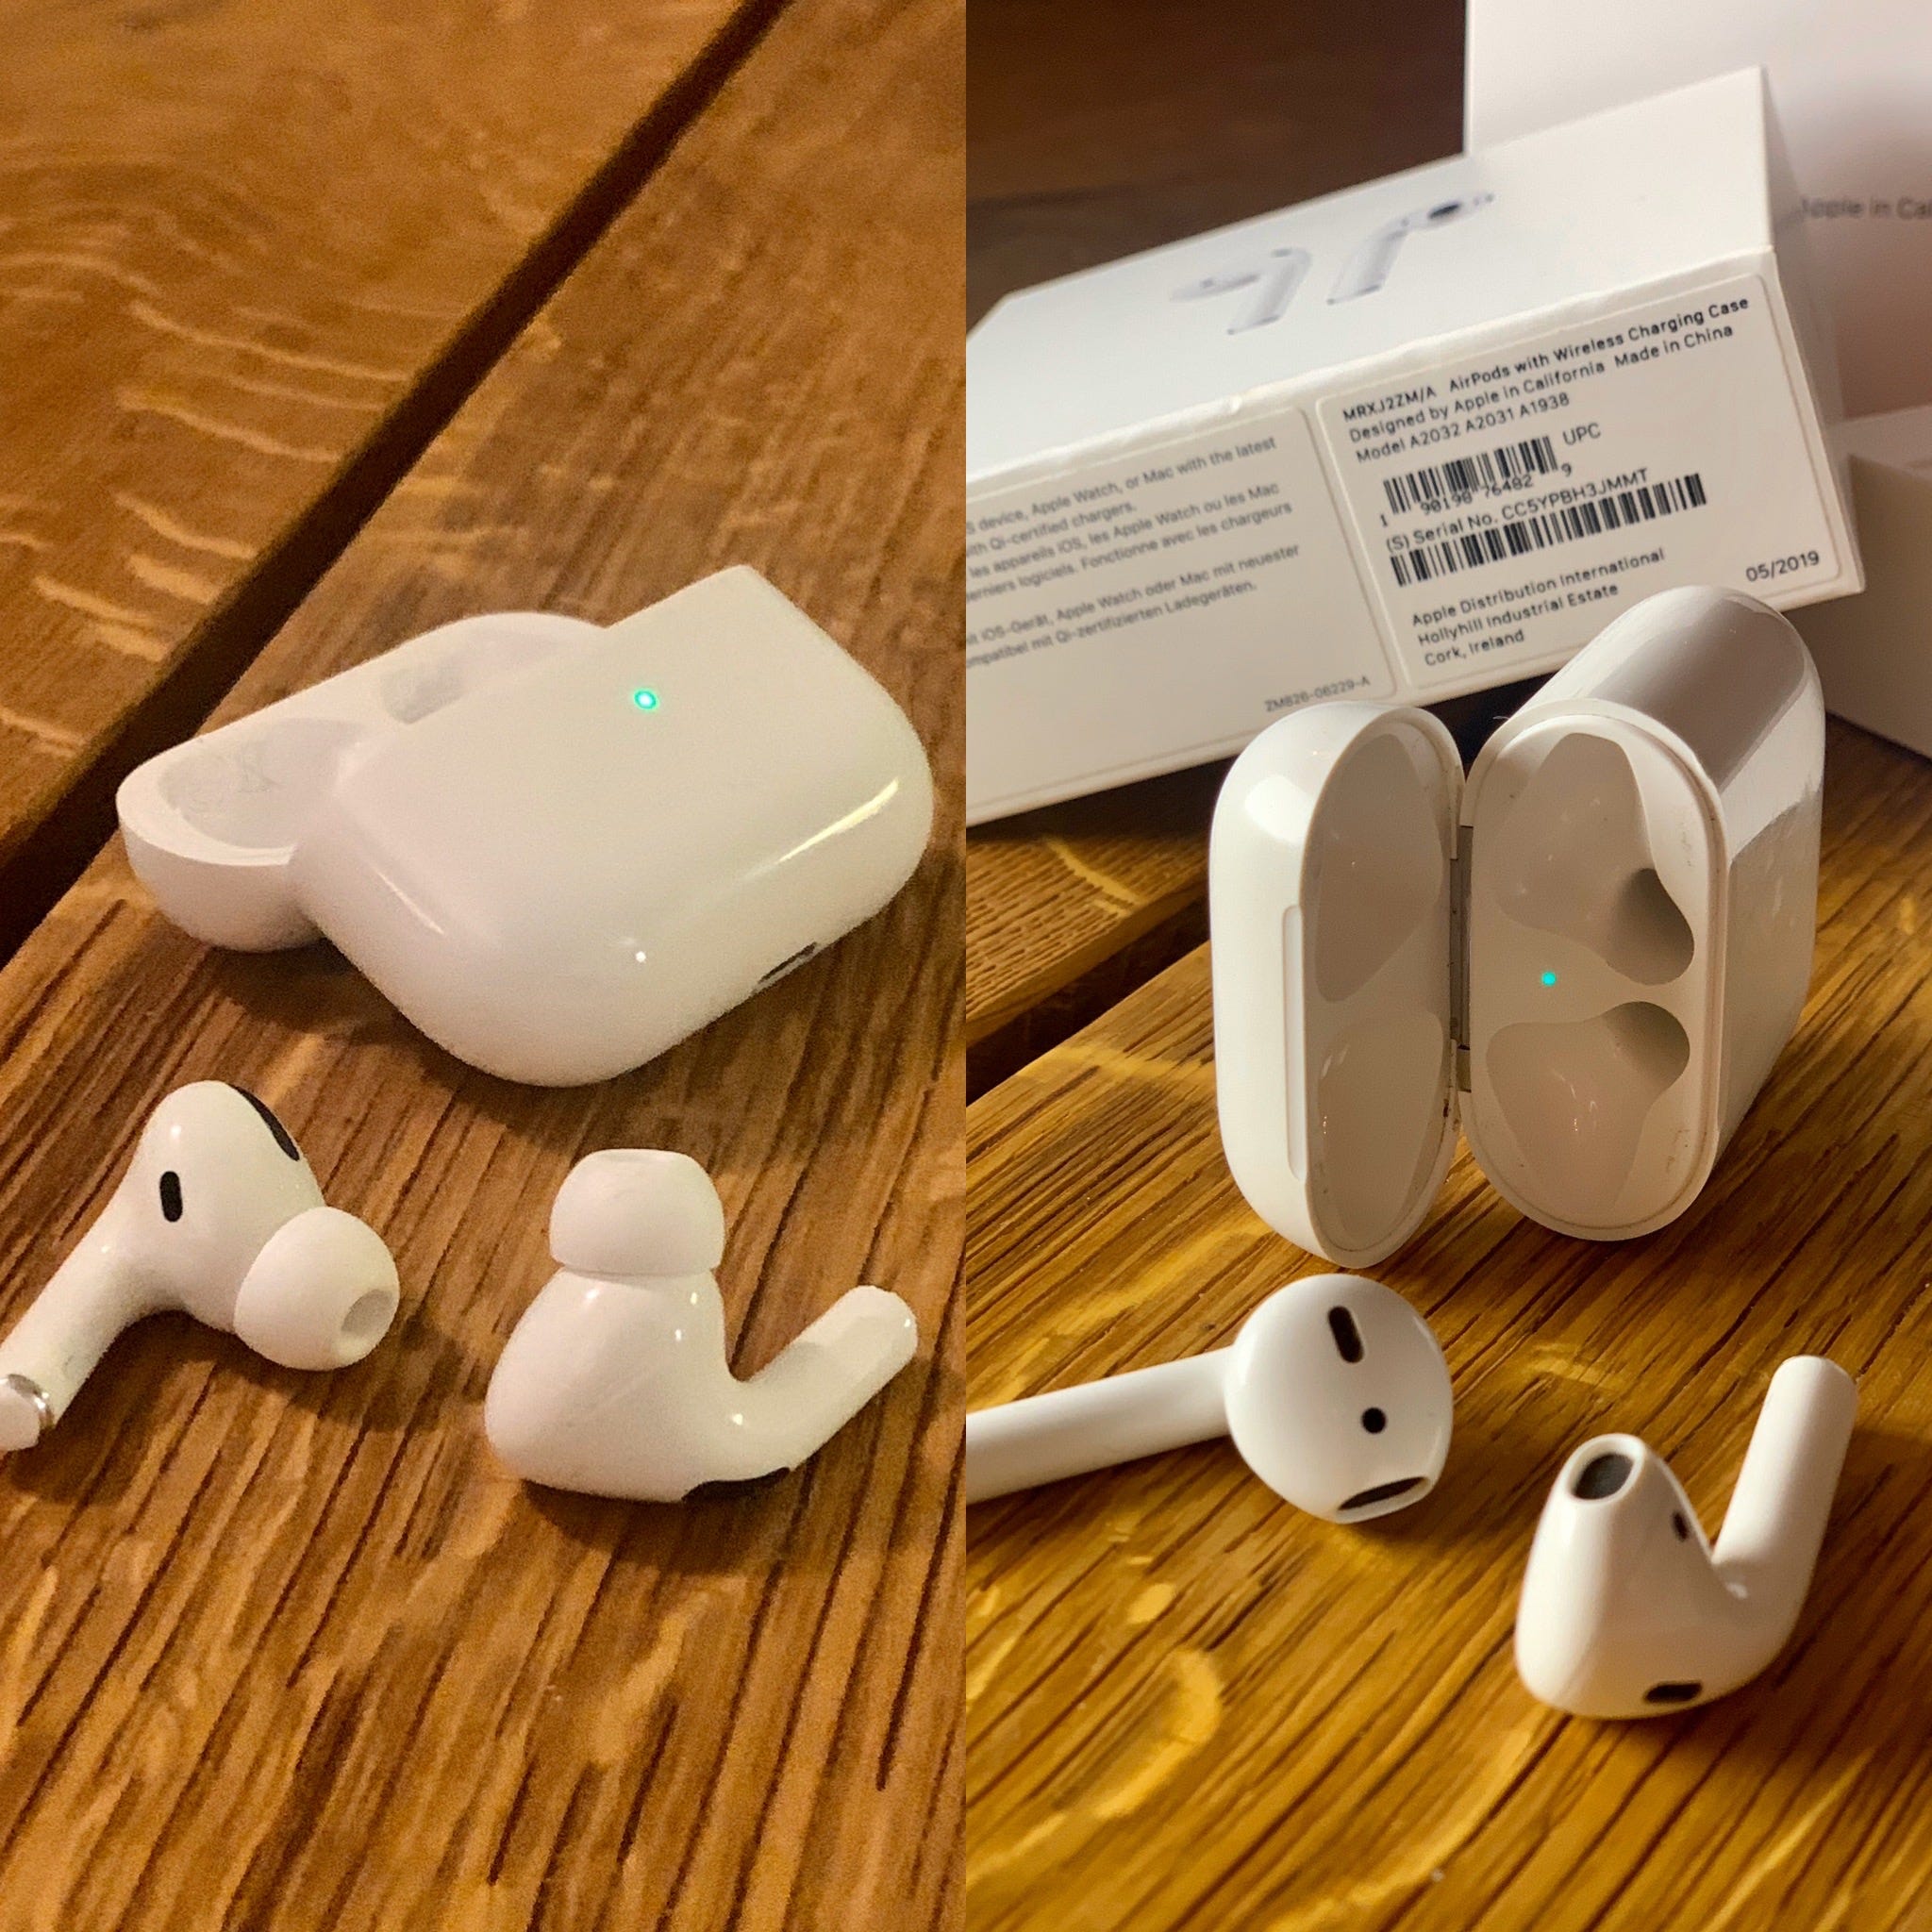 A2031 Airpods Pro | Store www.spora.ws